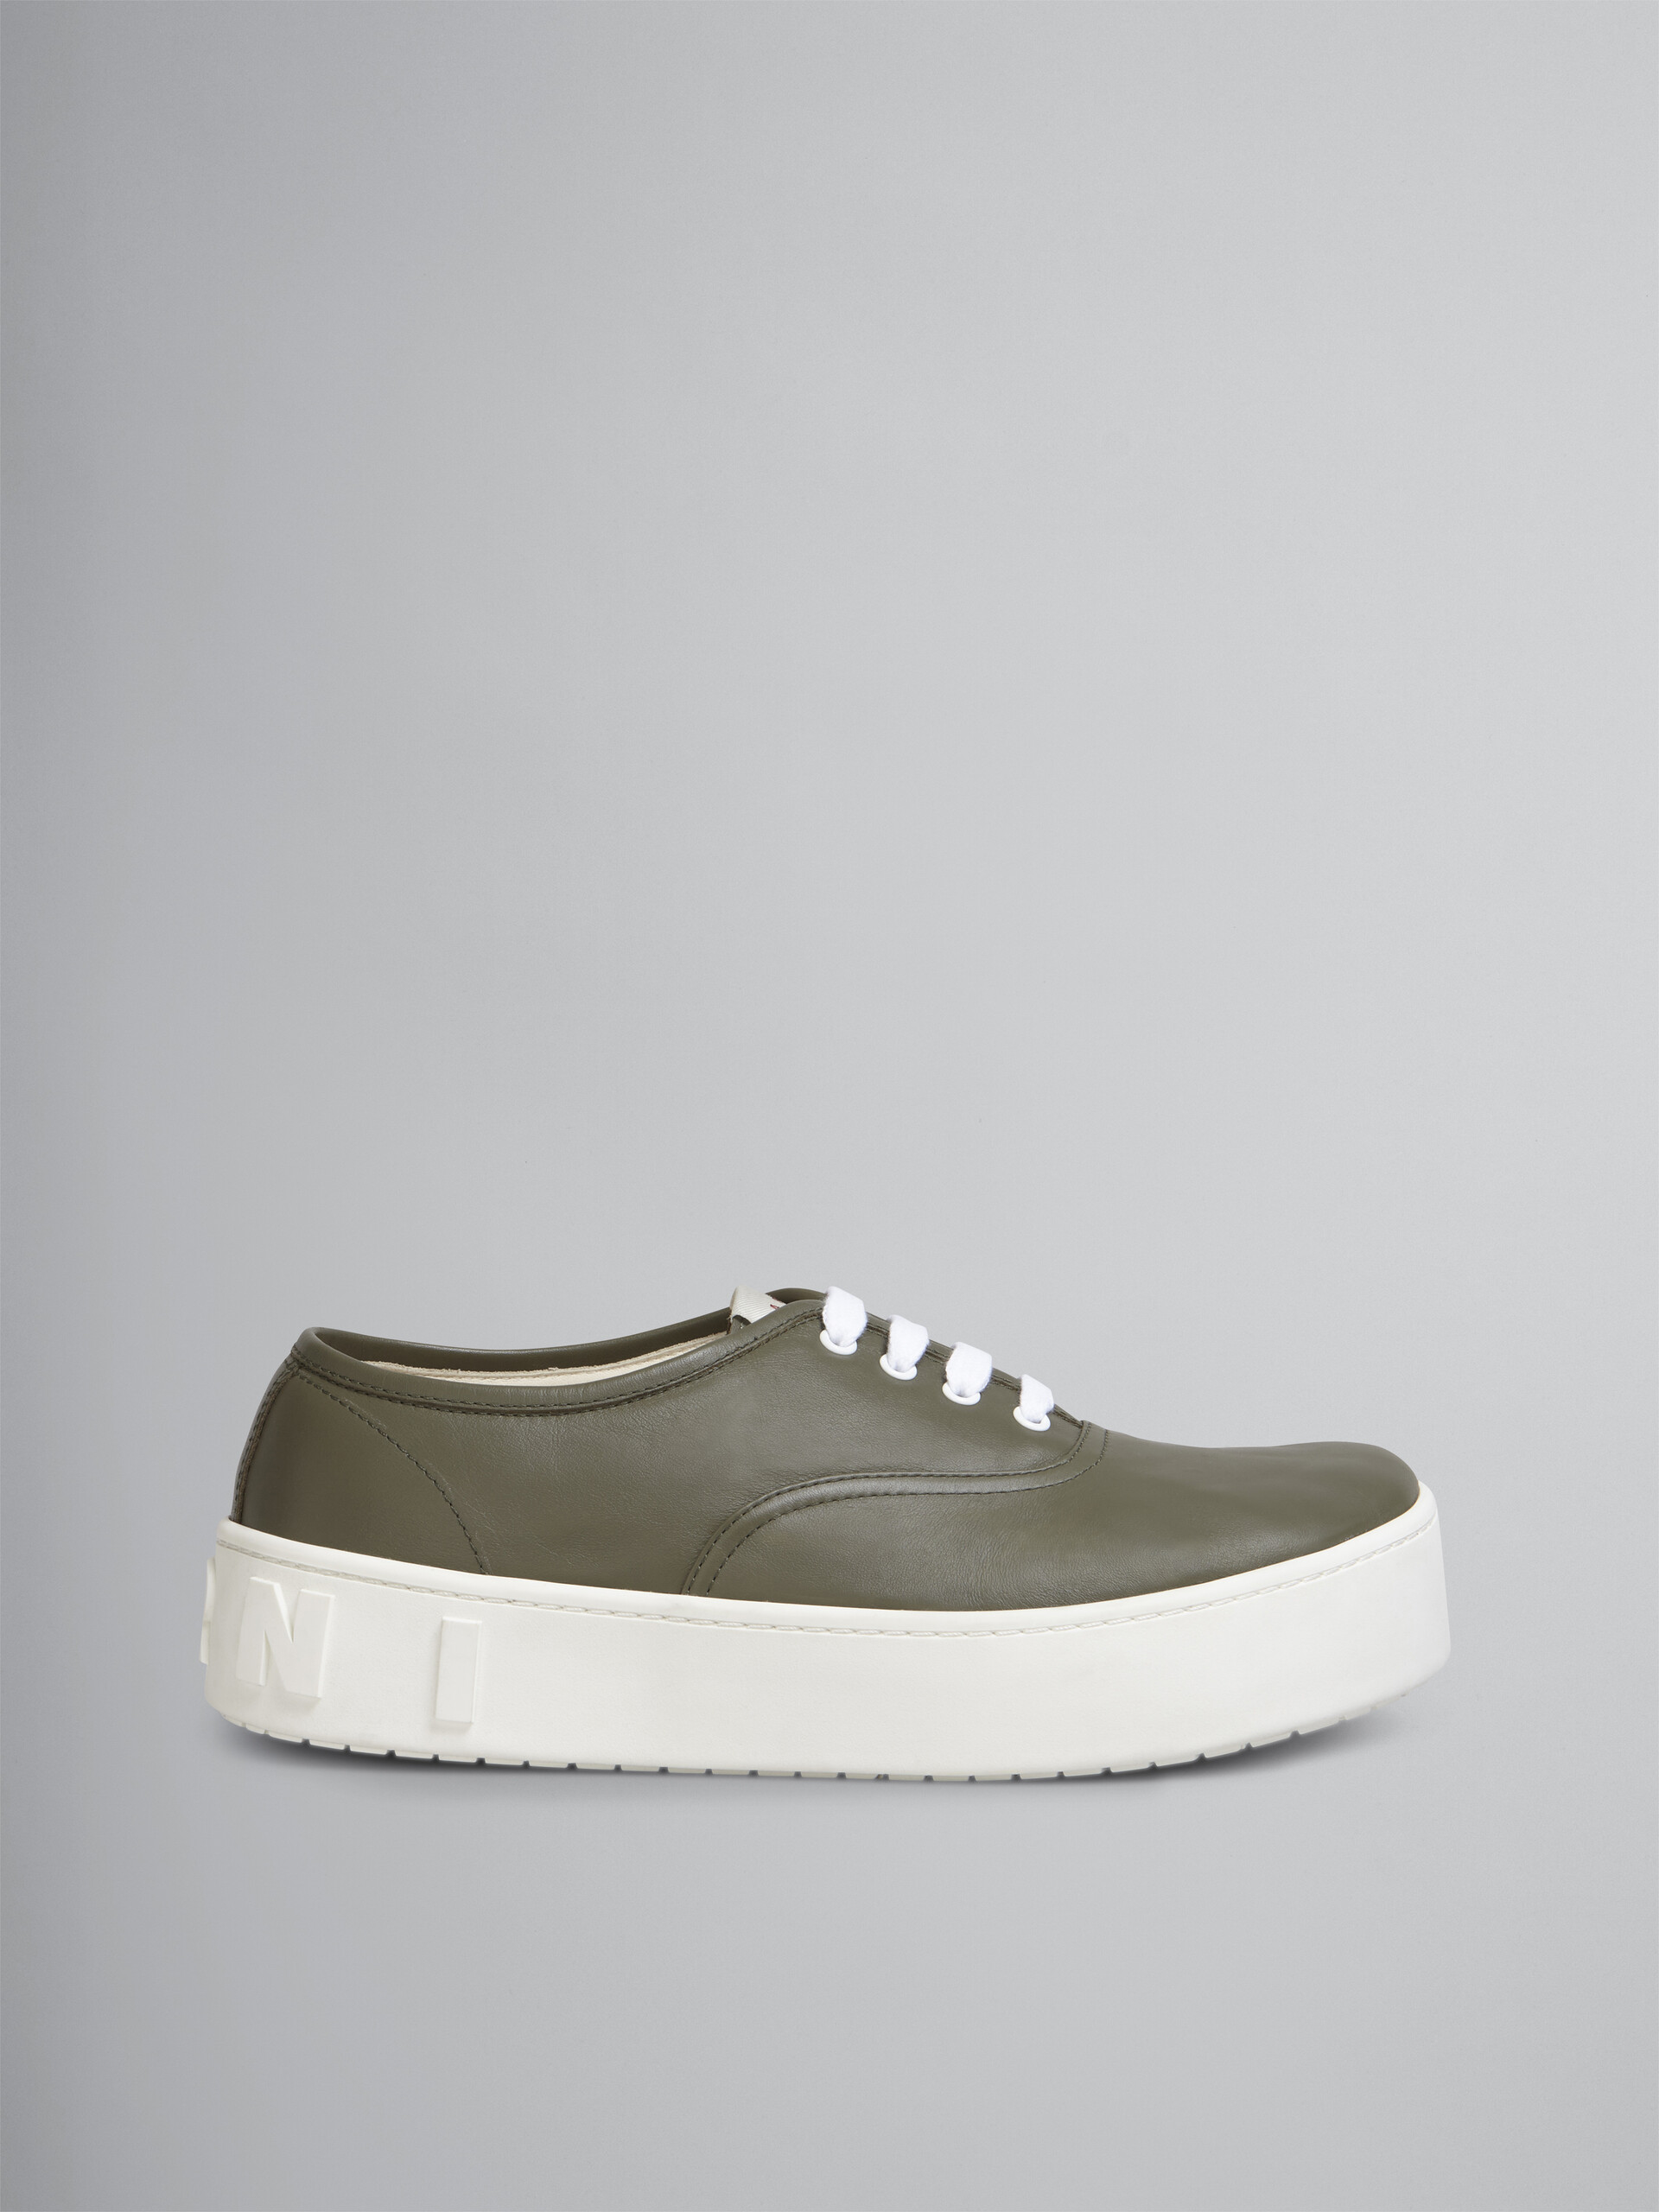 Green leather sneaker with maxi logo - Sneakers - Image 1